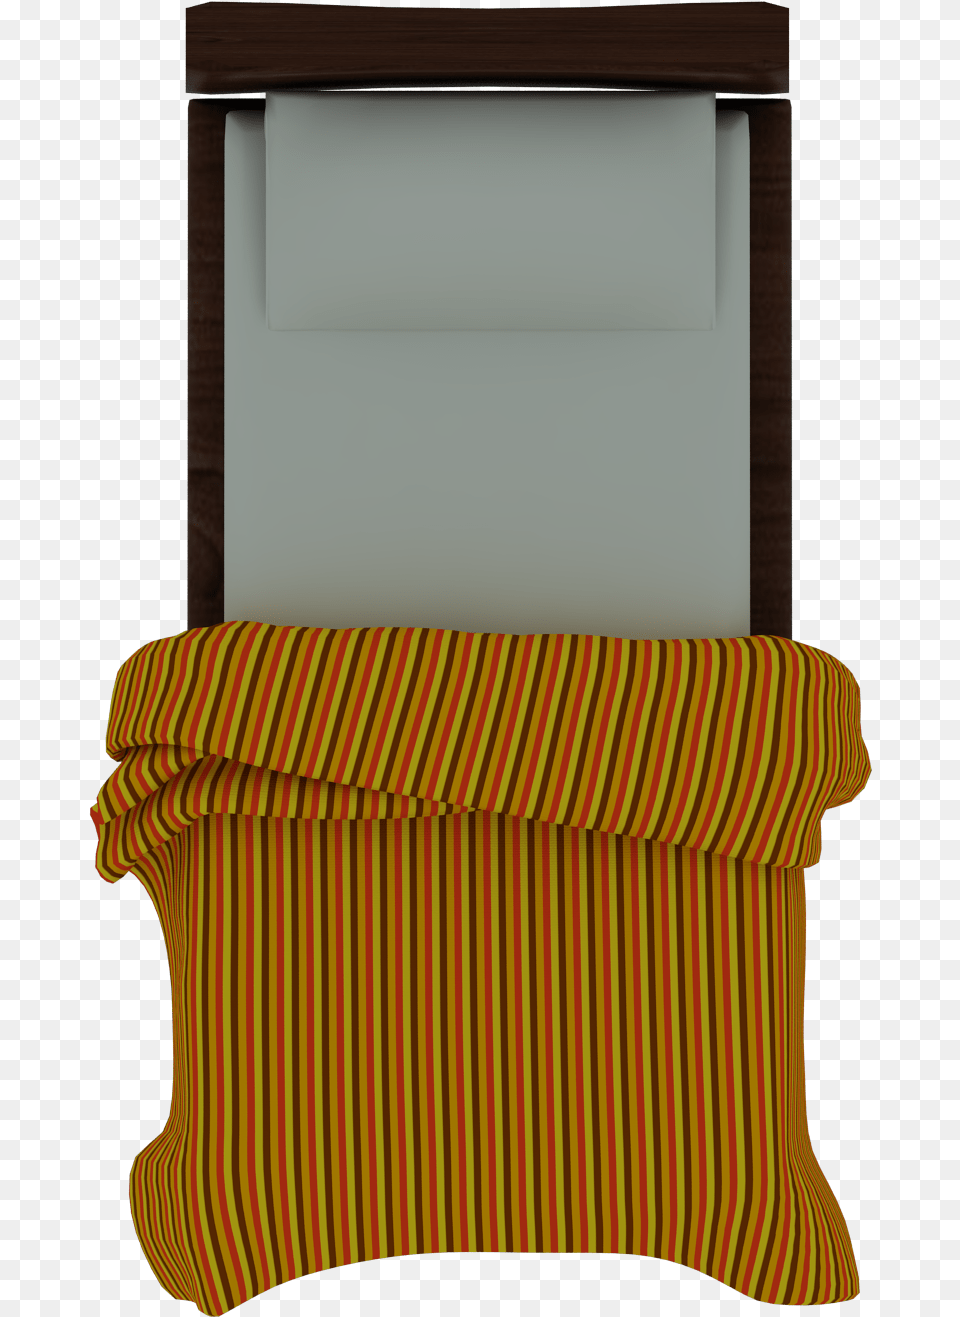 Folding Chair Download Folding Chair, Couch, Cushion, Furniture, Home Decor Free Transparent Png